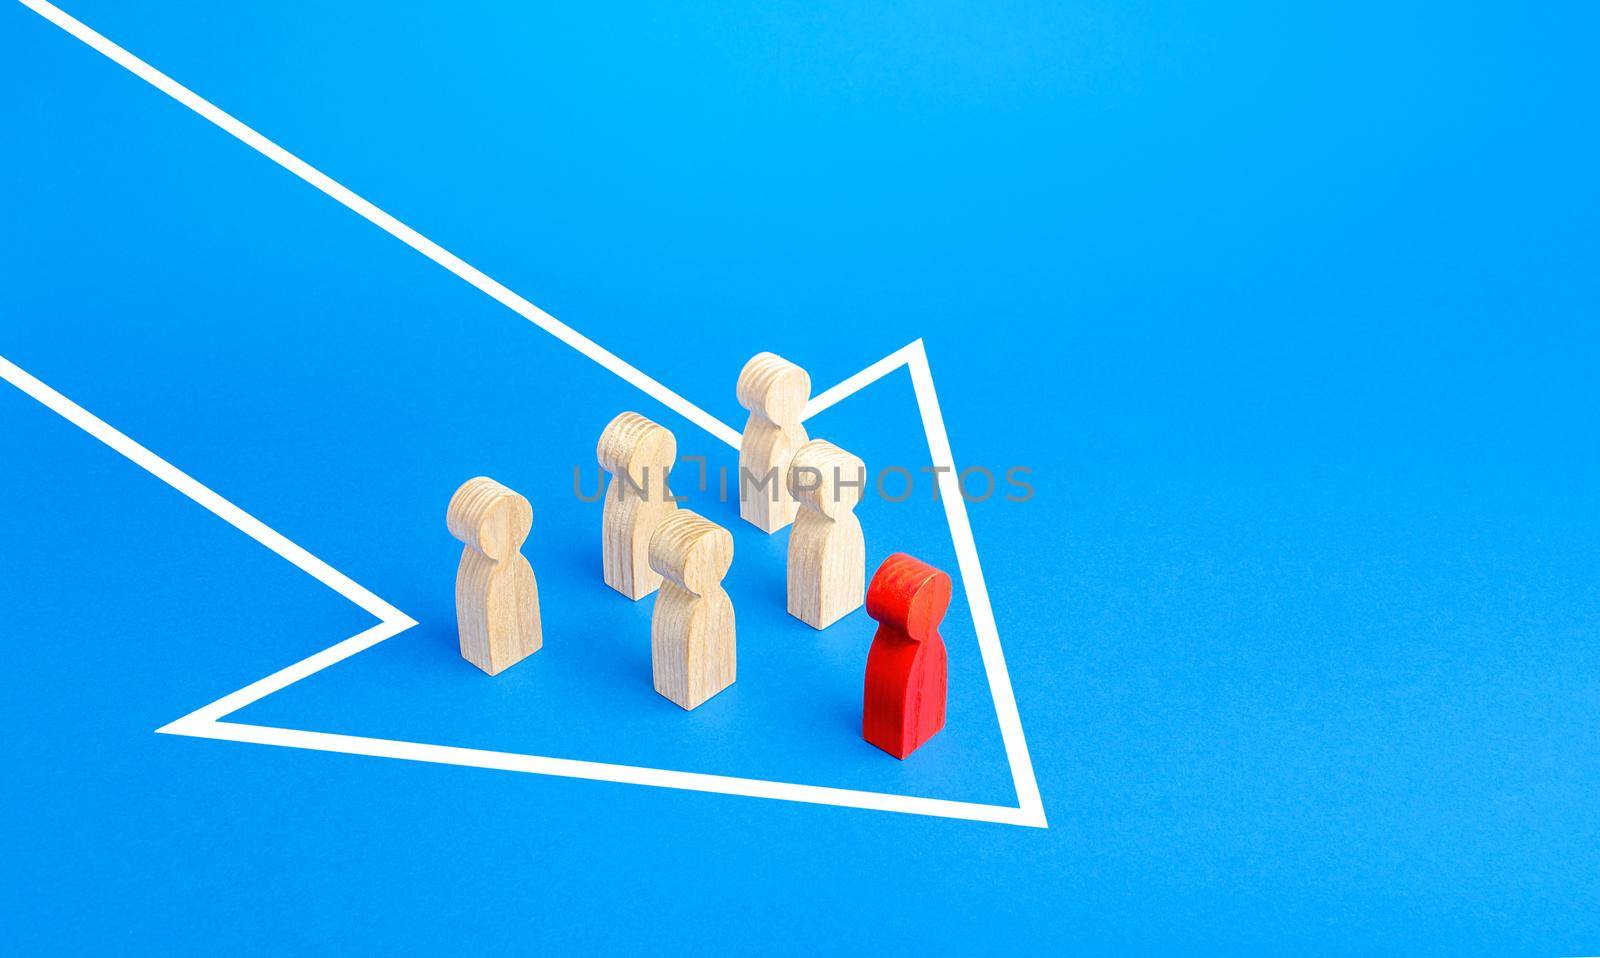 Figures of people under the leadership of leader moving in a single arrow direction. Follow the goal together. Organization cooperation. Teamwork. Discipline and consolidation. Aspirations by iLixe48